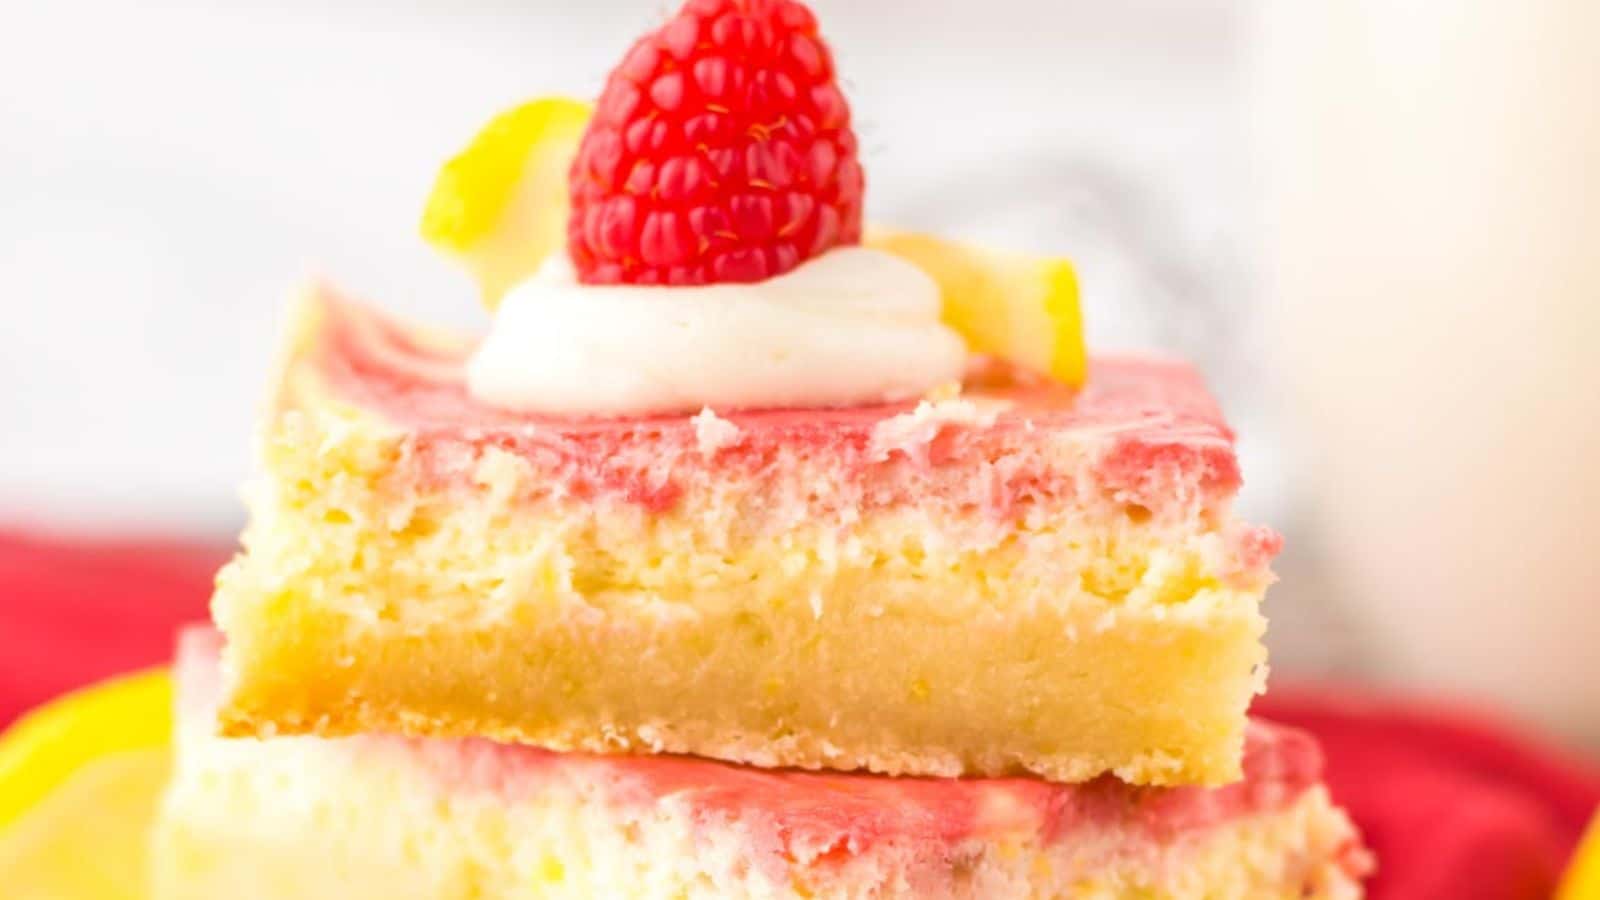 A close-up image of layered lemon raspberry cake slices topped with fresh raspberries and lemon zest.